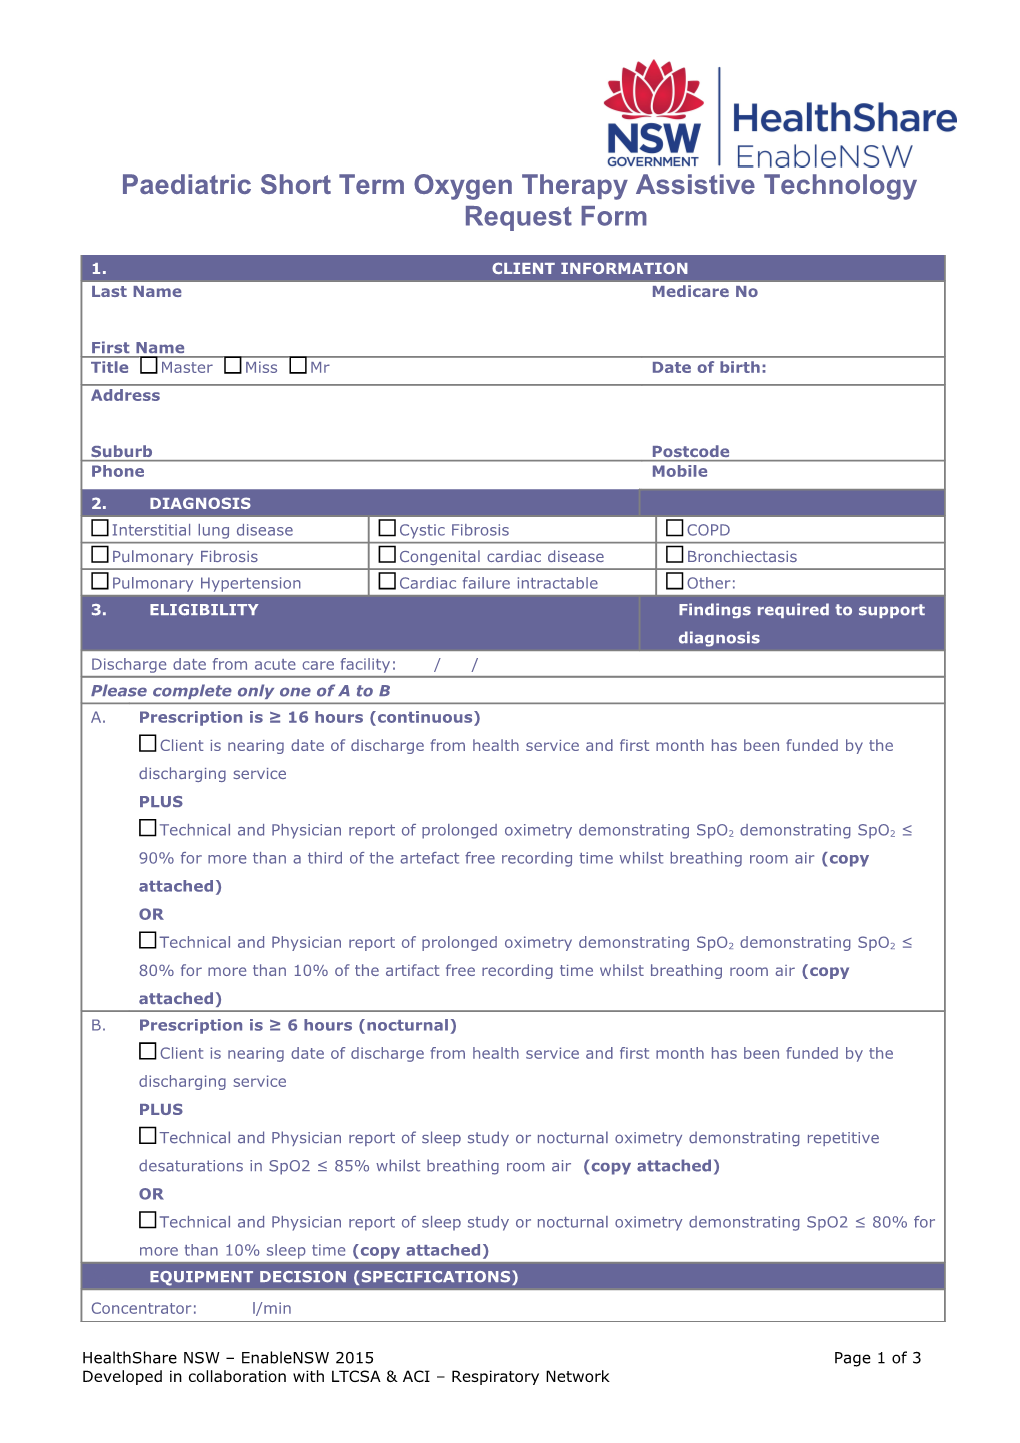 Paediatric Short Term Oxygen Therapy Assistive Technology Request Form